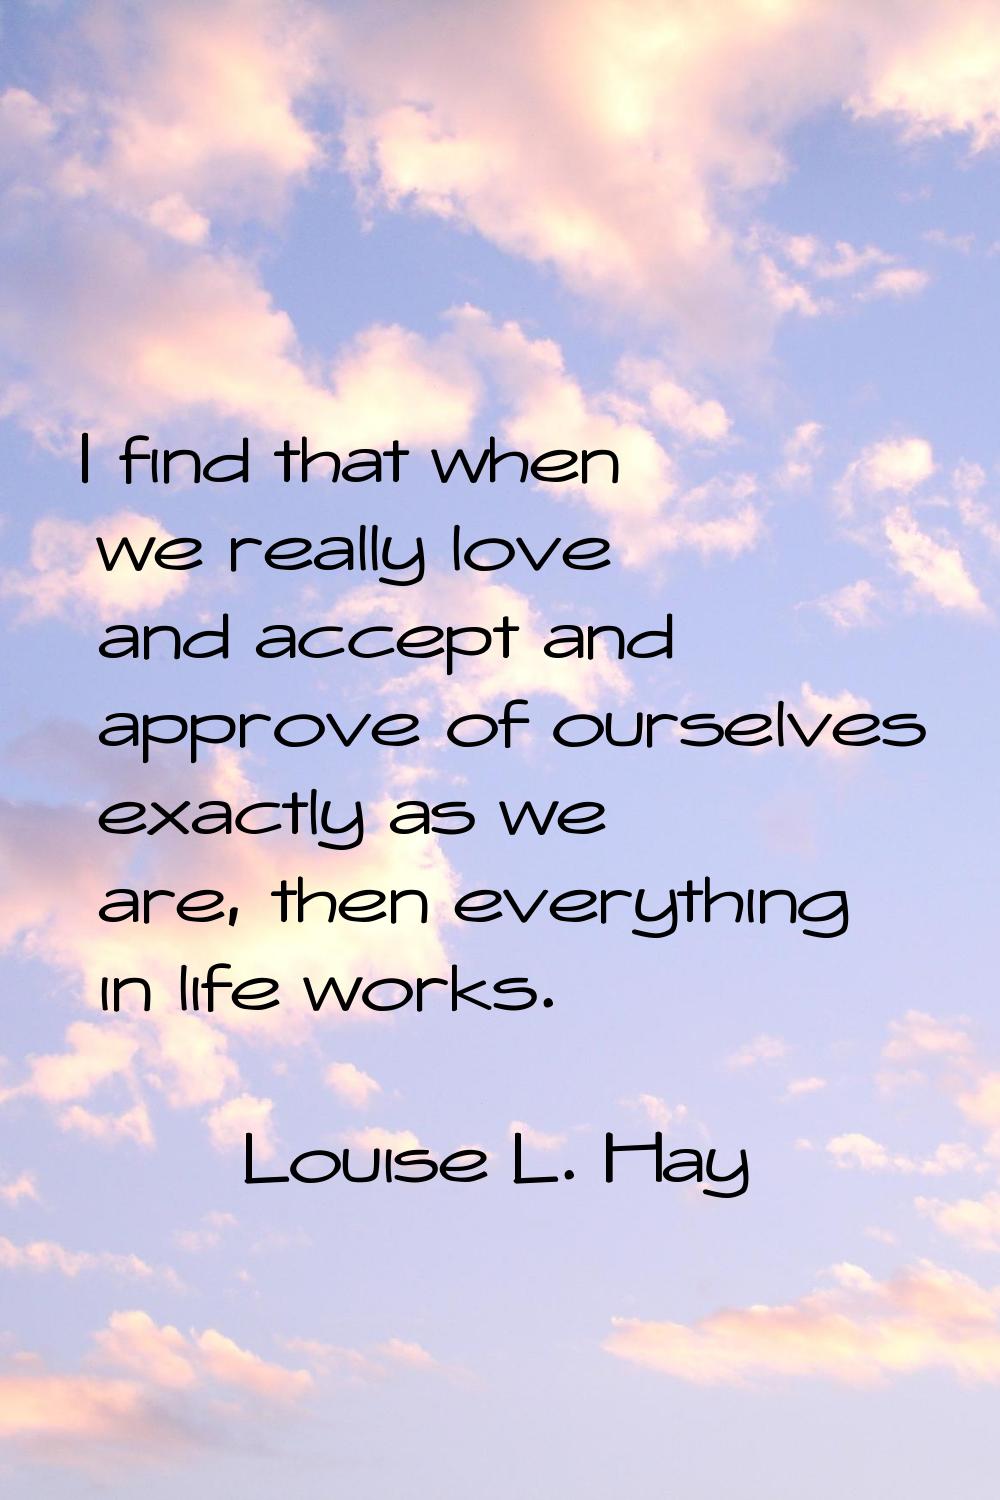 I find that when we really love and accept and approve of ourselves exactly as we are, then everyth